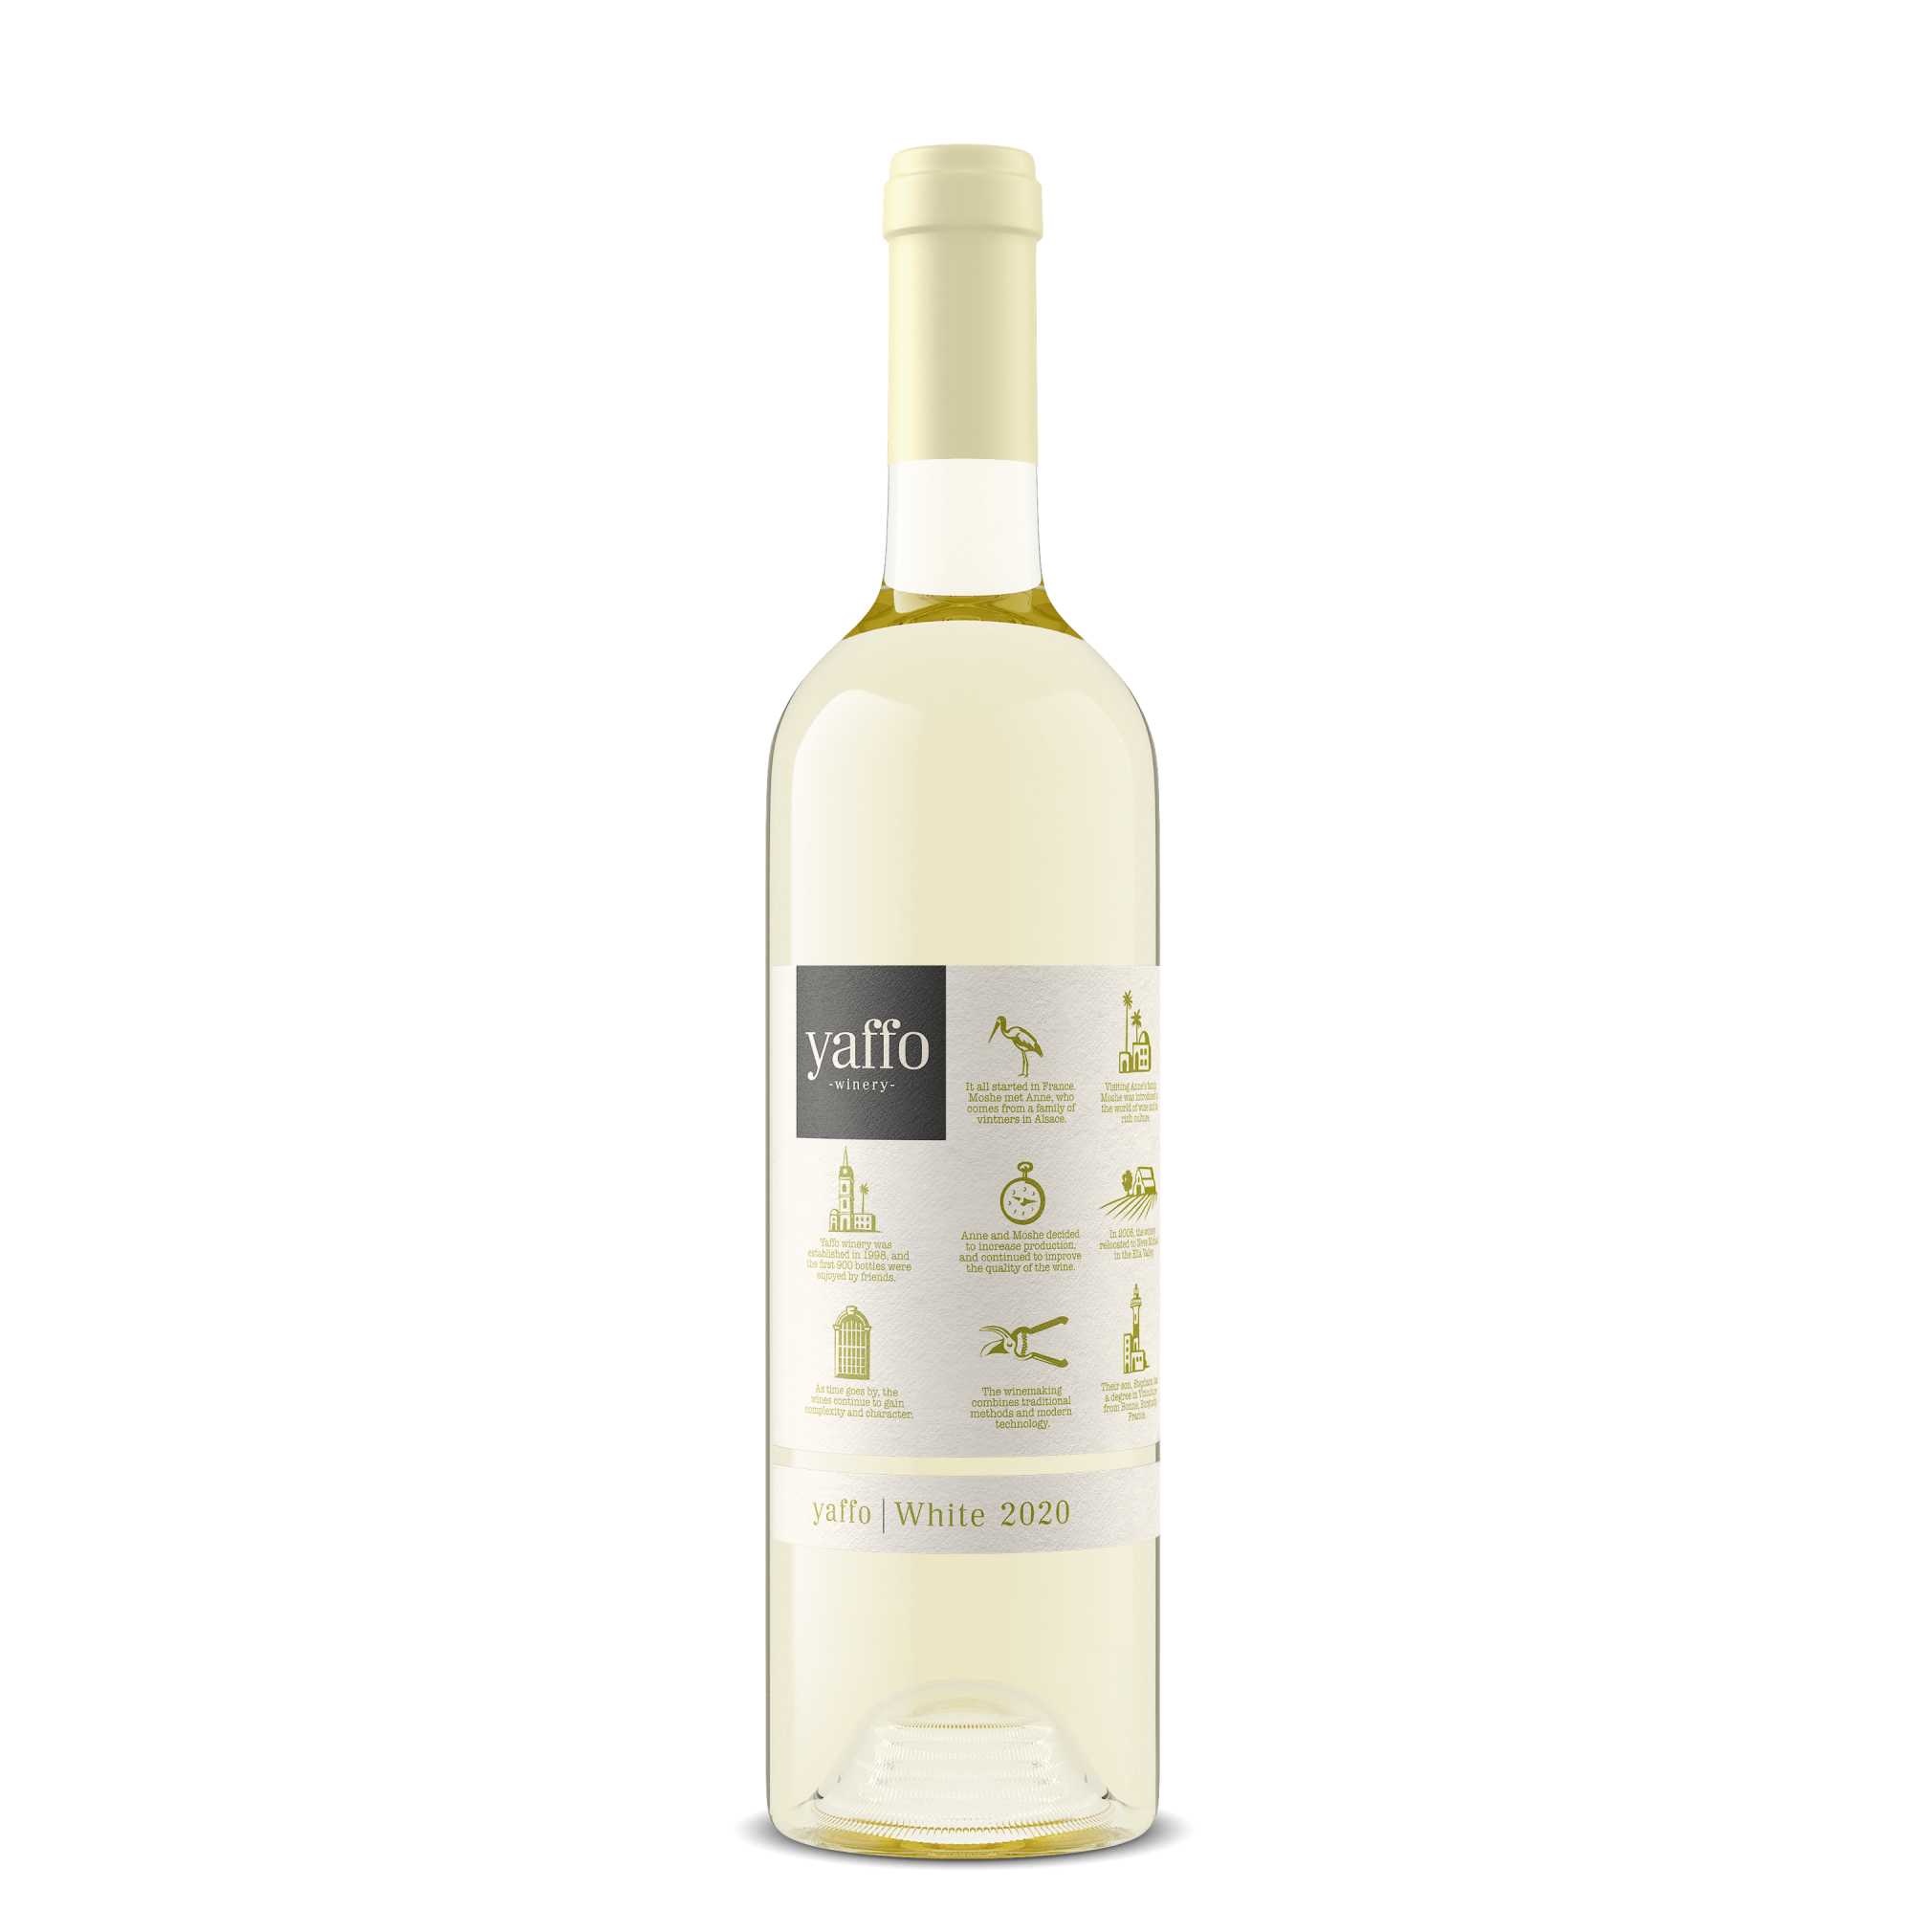 Yaffo White - A Kosher Wine From Israel